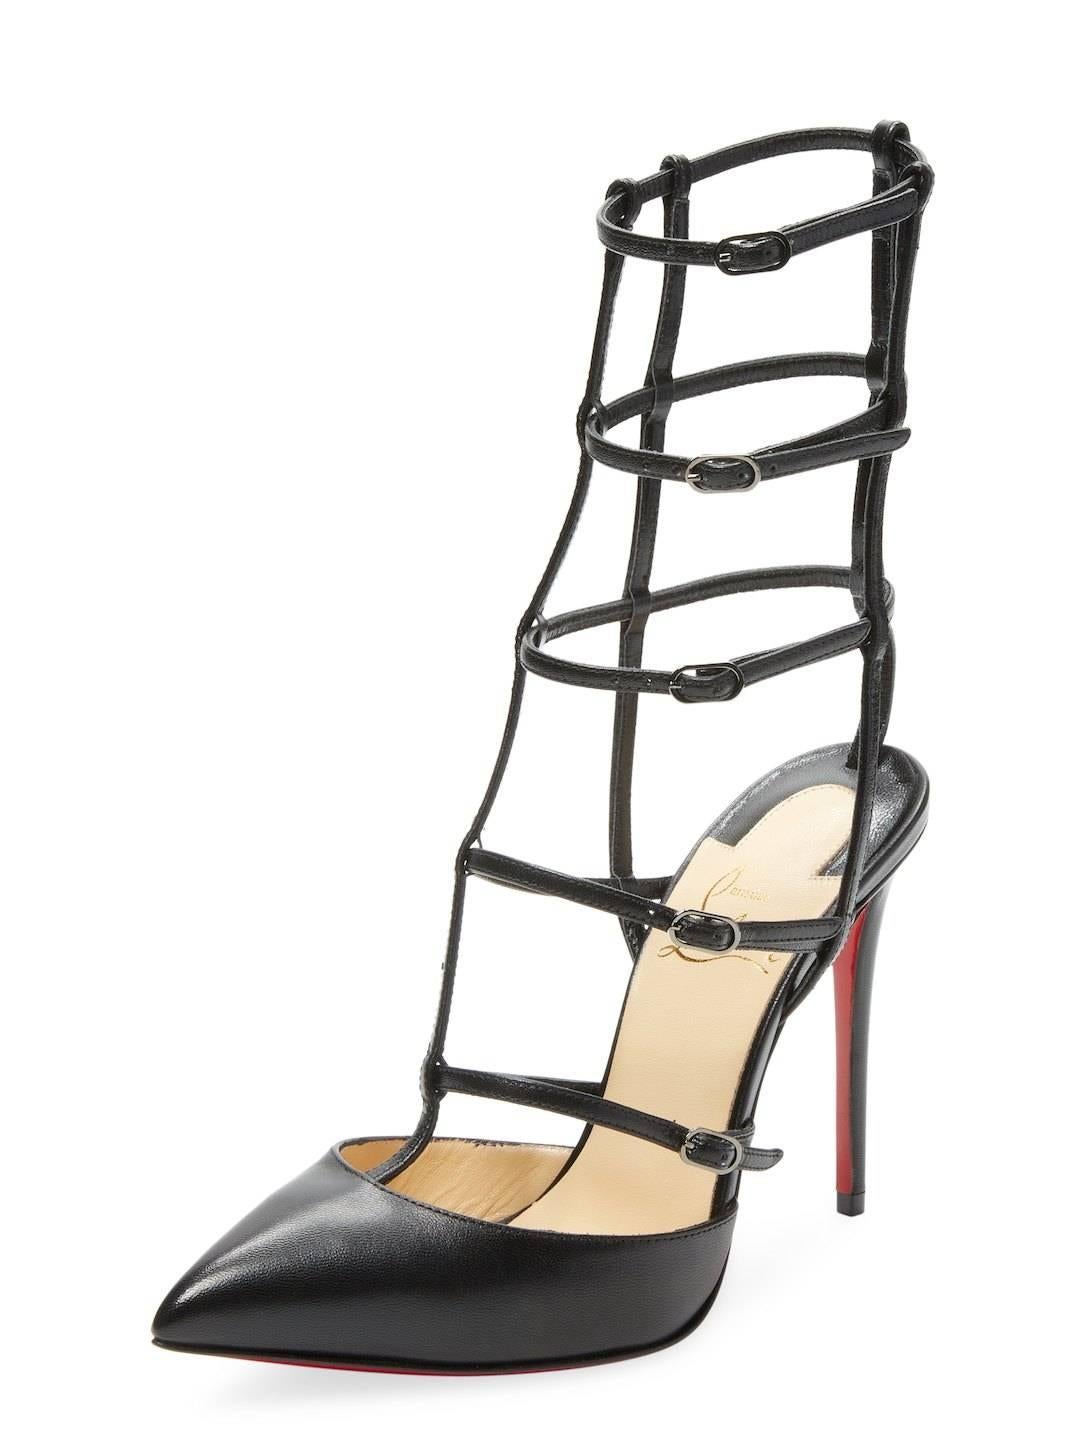 Christian Louboutin New Black Leather Cage Evening Sandals Heels Booties in Box 1